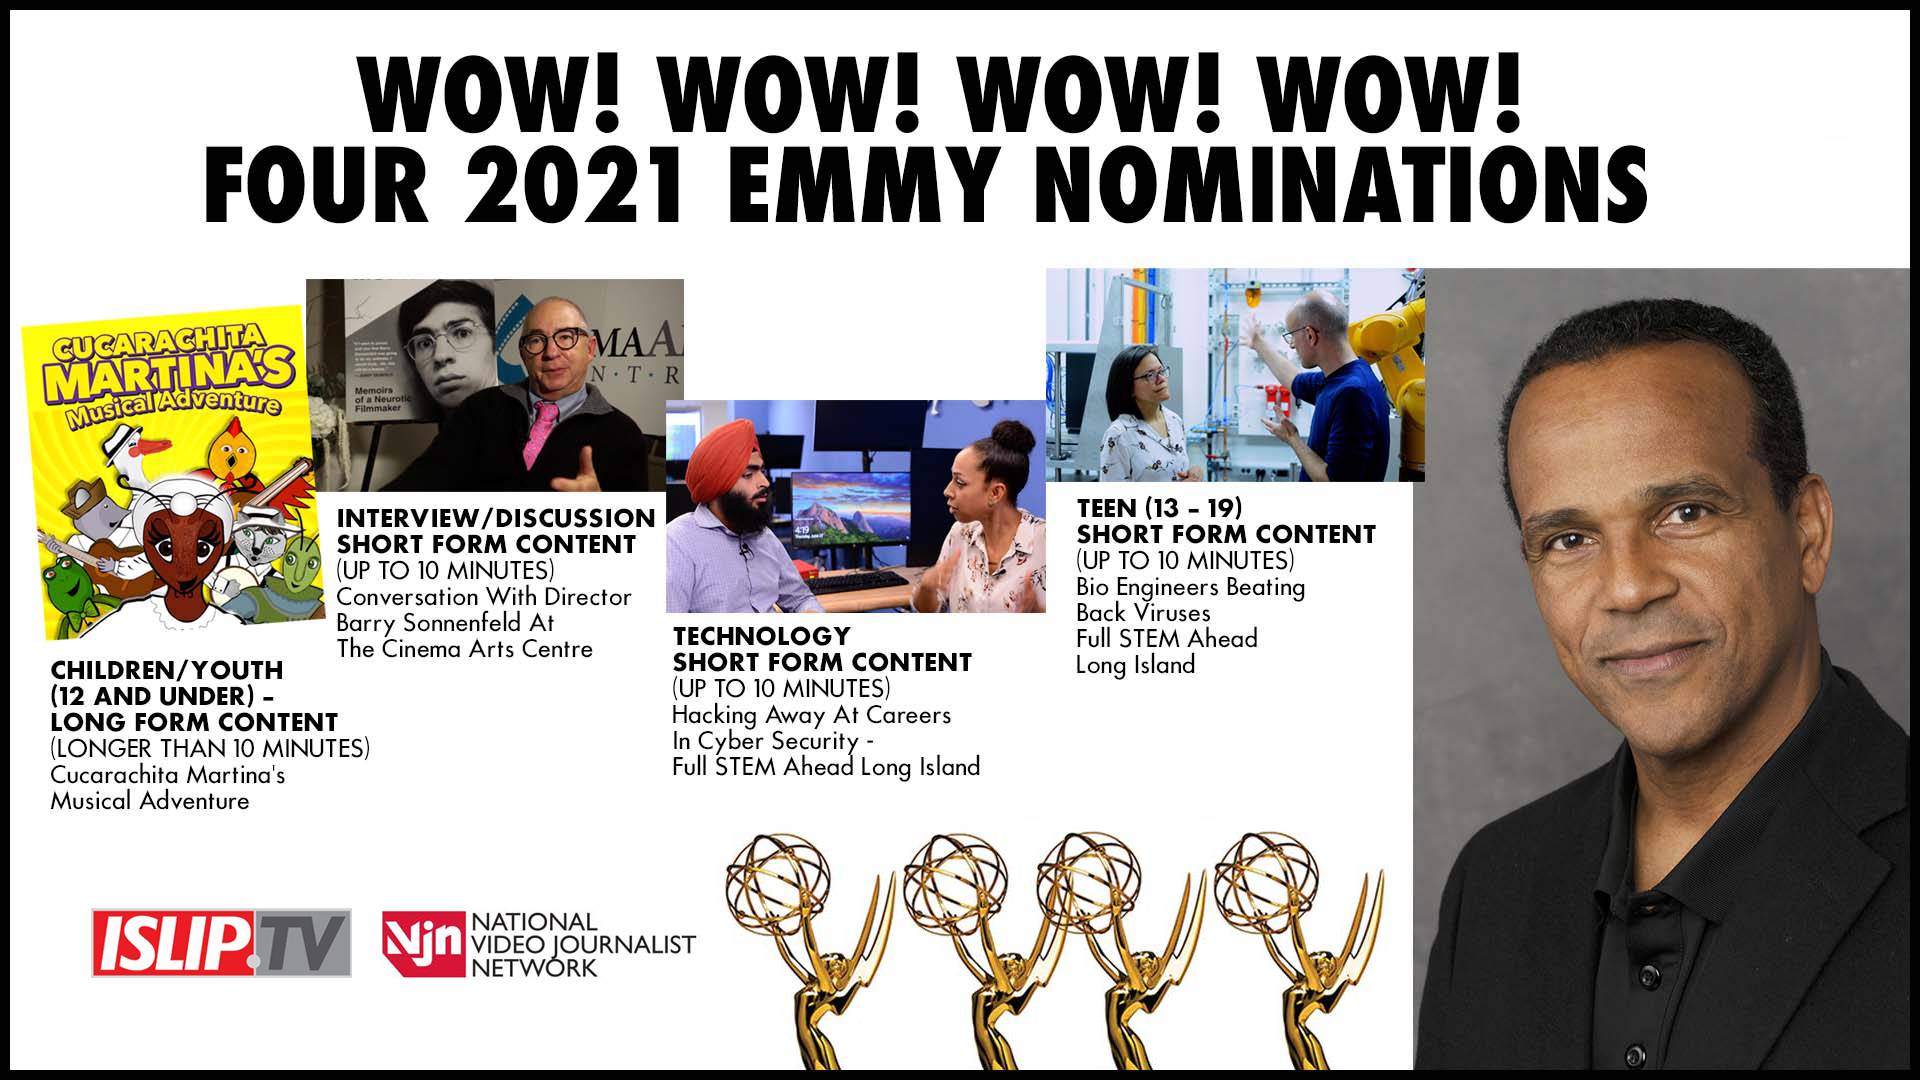 Wow! Wow! Wow! Wow! Four 2021 Emmy® Nominations for Islip TV & NVJN